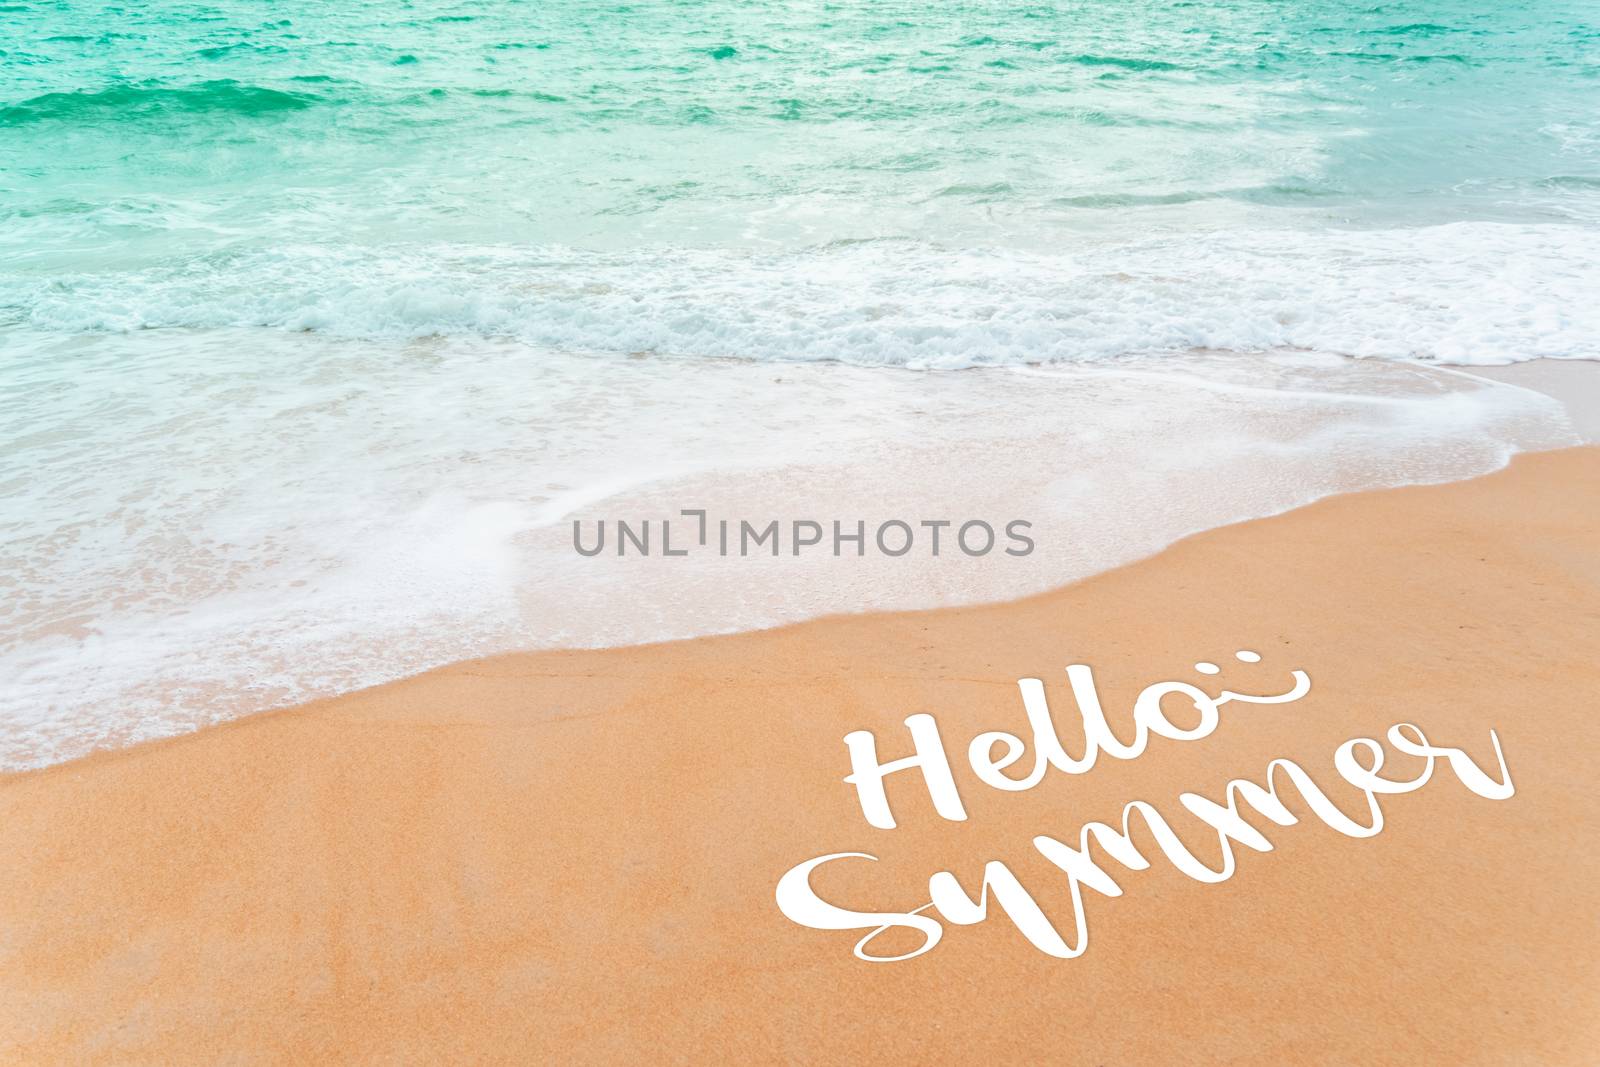 Hello summer qoute on blur beach and tropical coconut palm summer style abstract blurry background. Holiday vacation time concept.